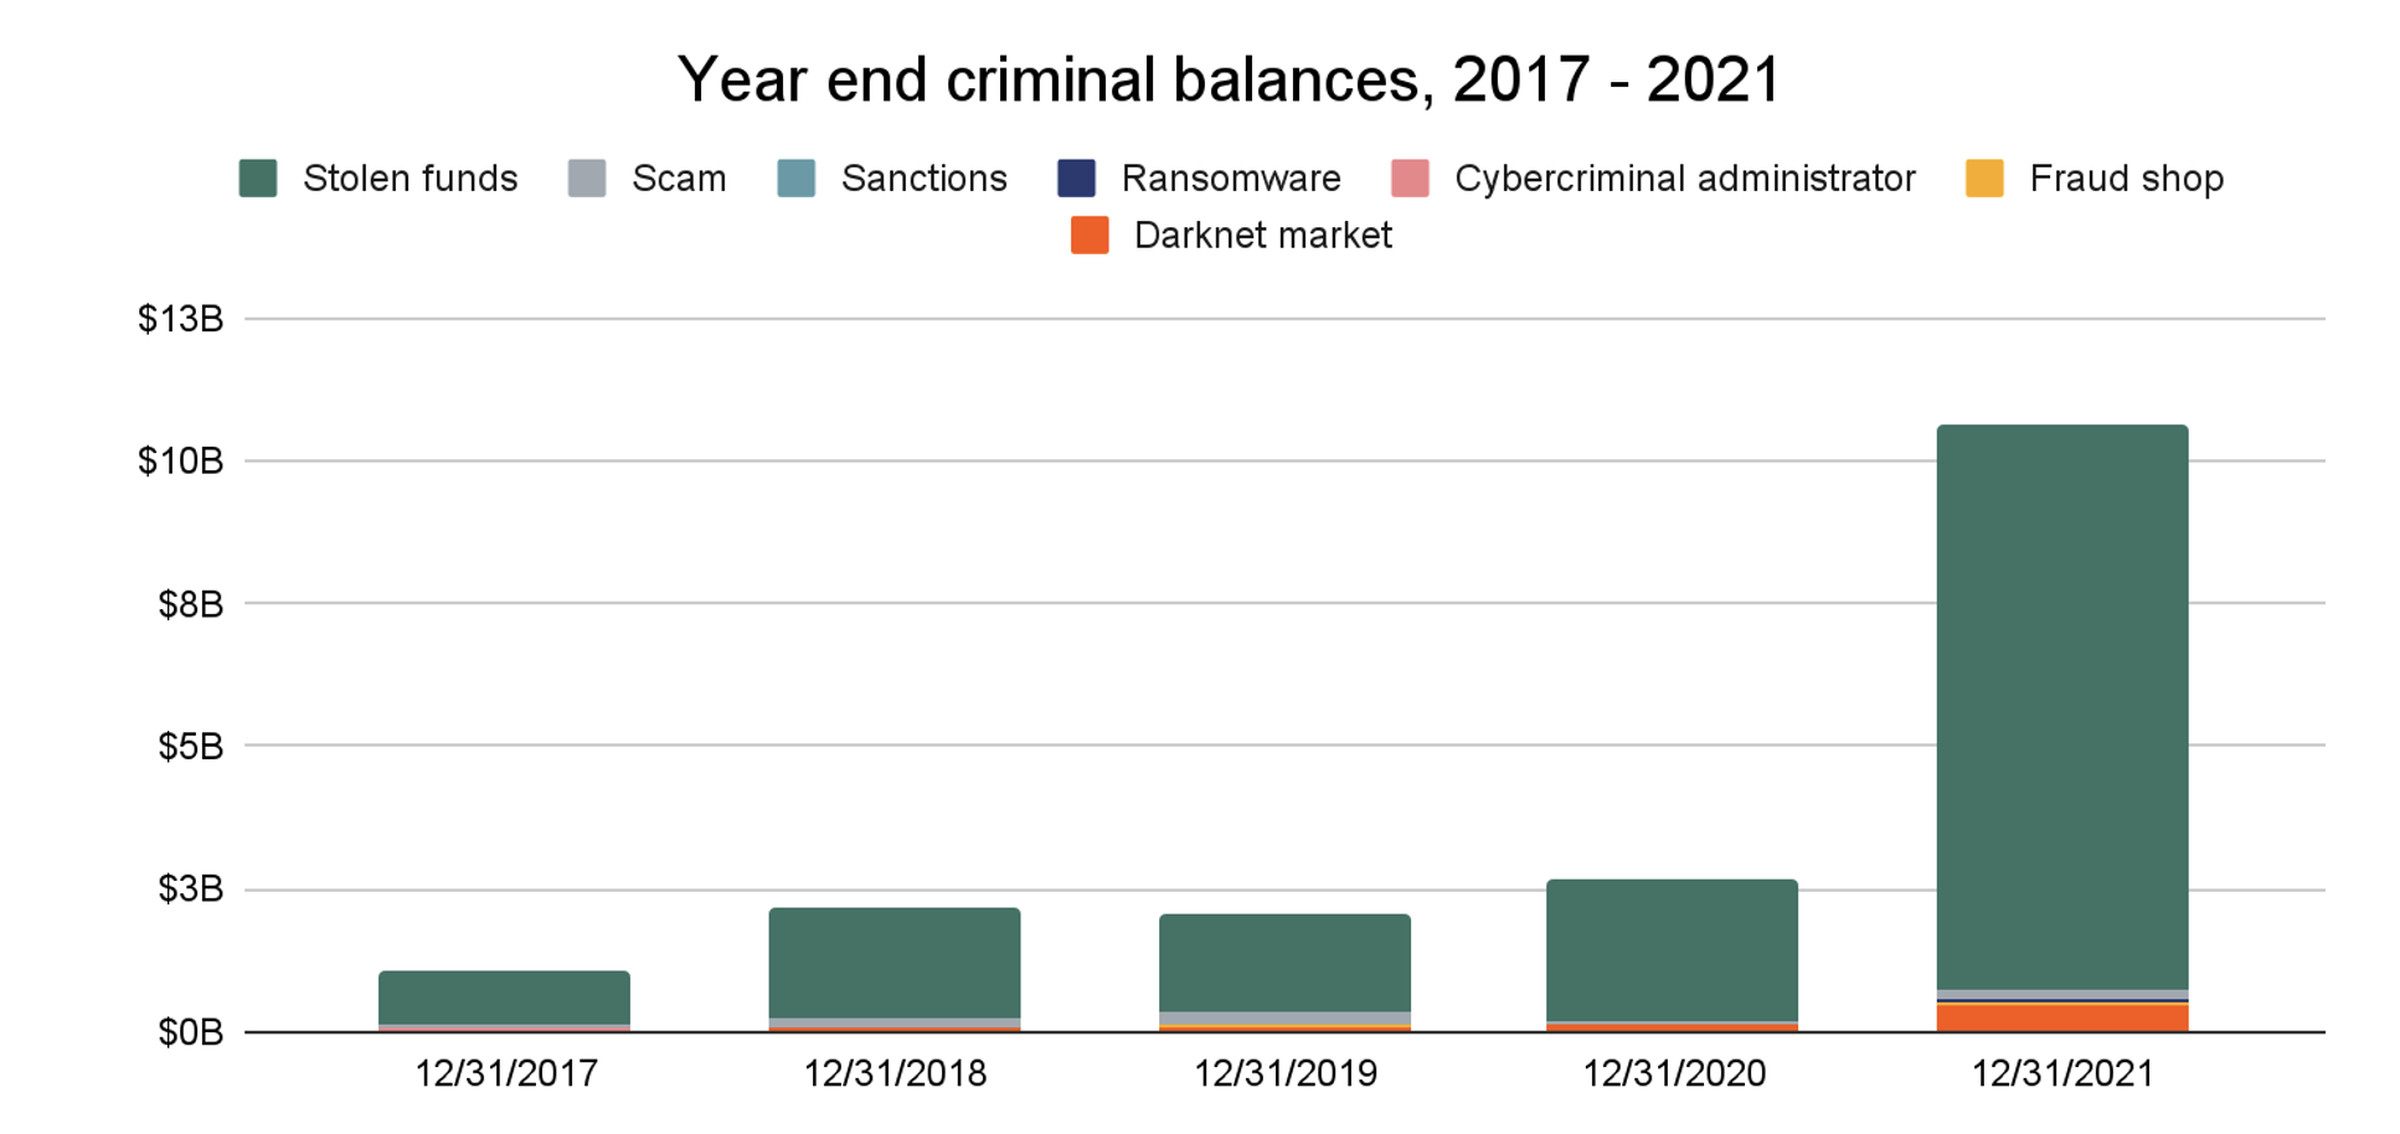 The value of the crypto owned by criminals at the end of the year, broken down by what type of illicit activity the funds are linked with.